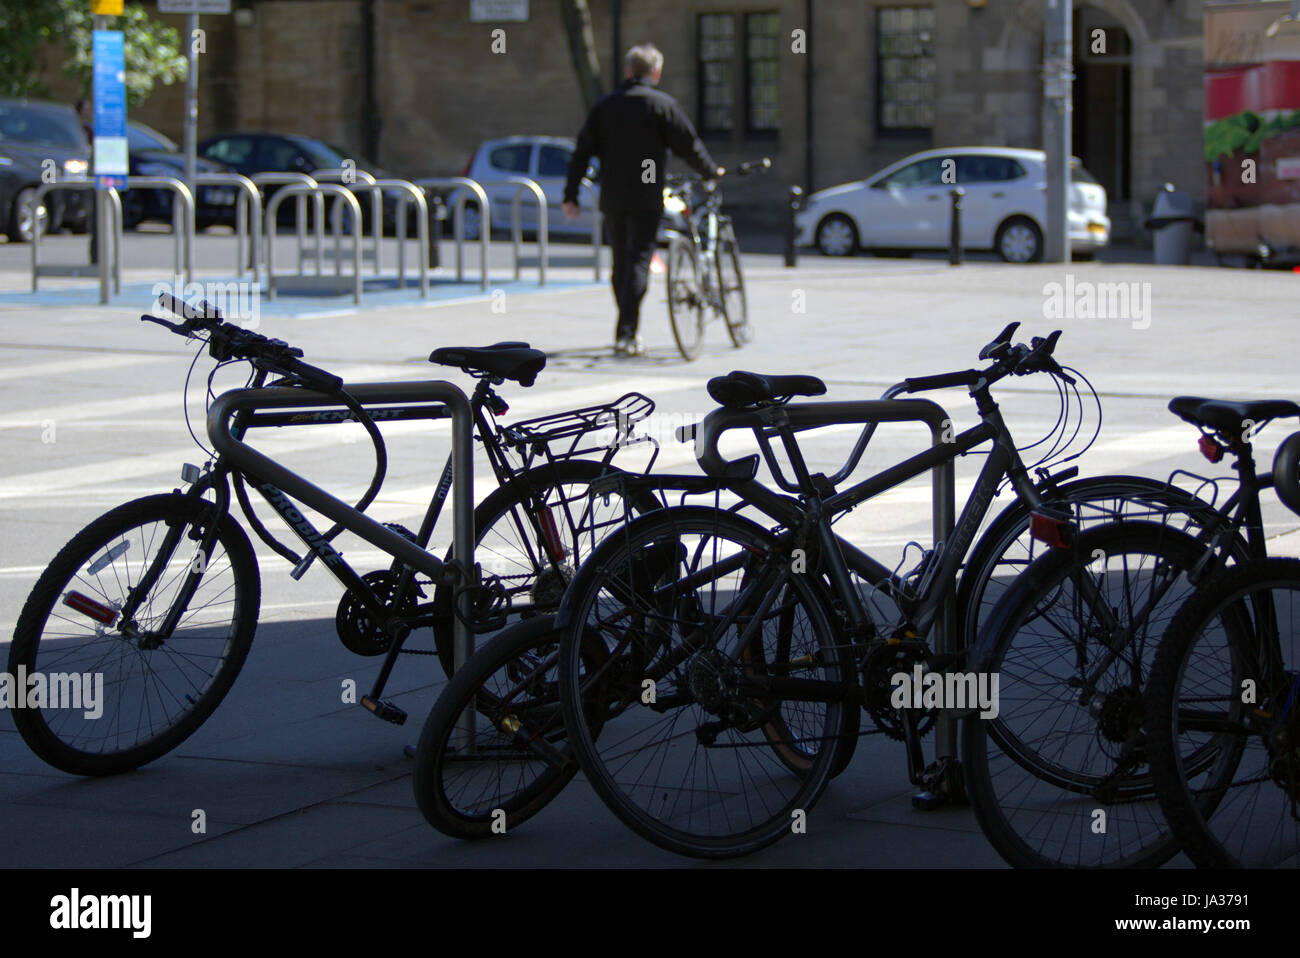 generic cyclist silhouette bike rack foreground  and solo biker background Stock Photo